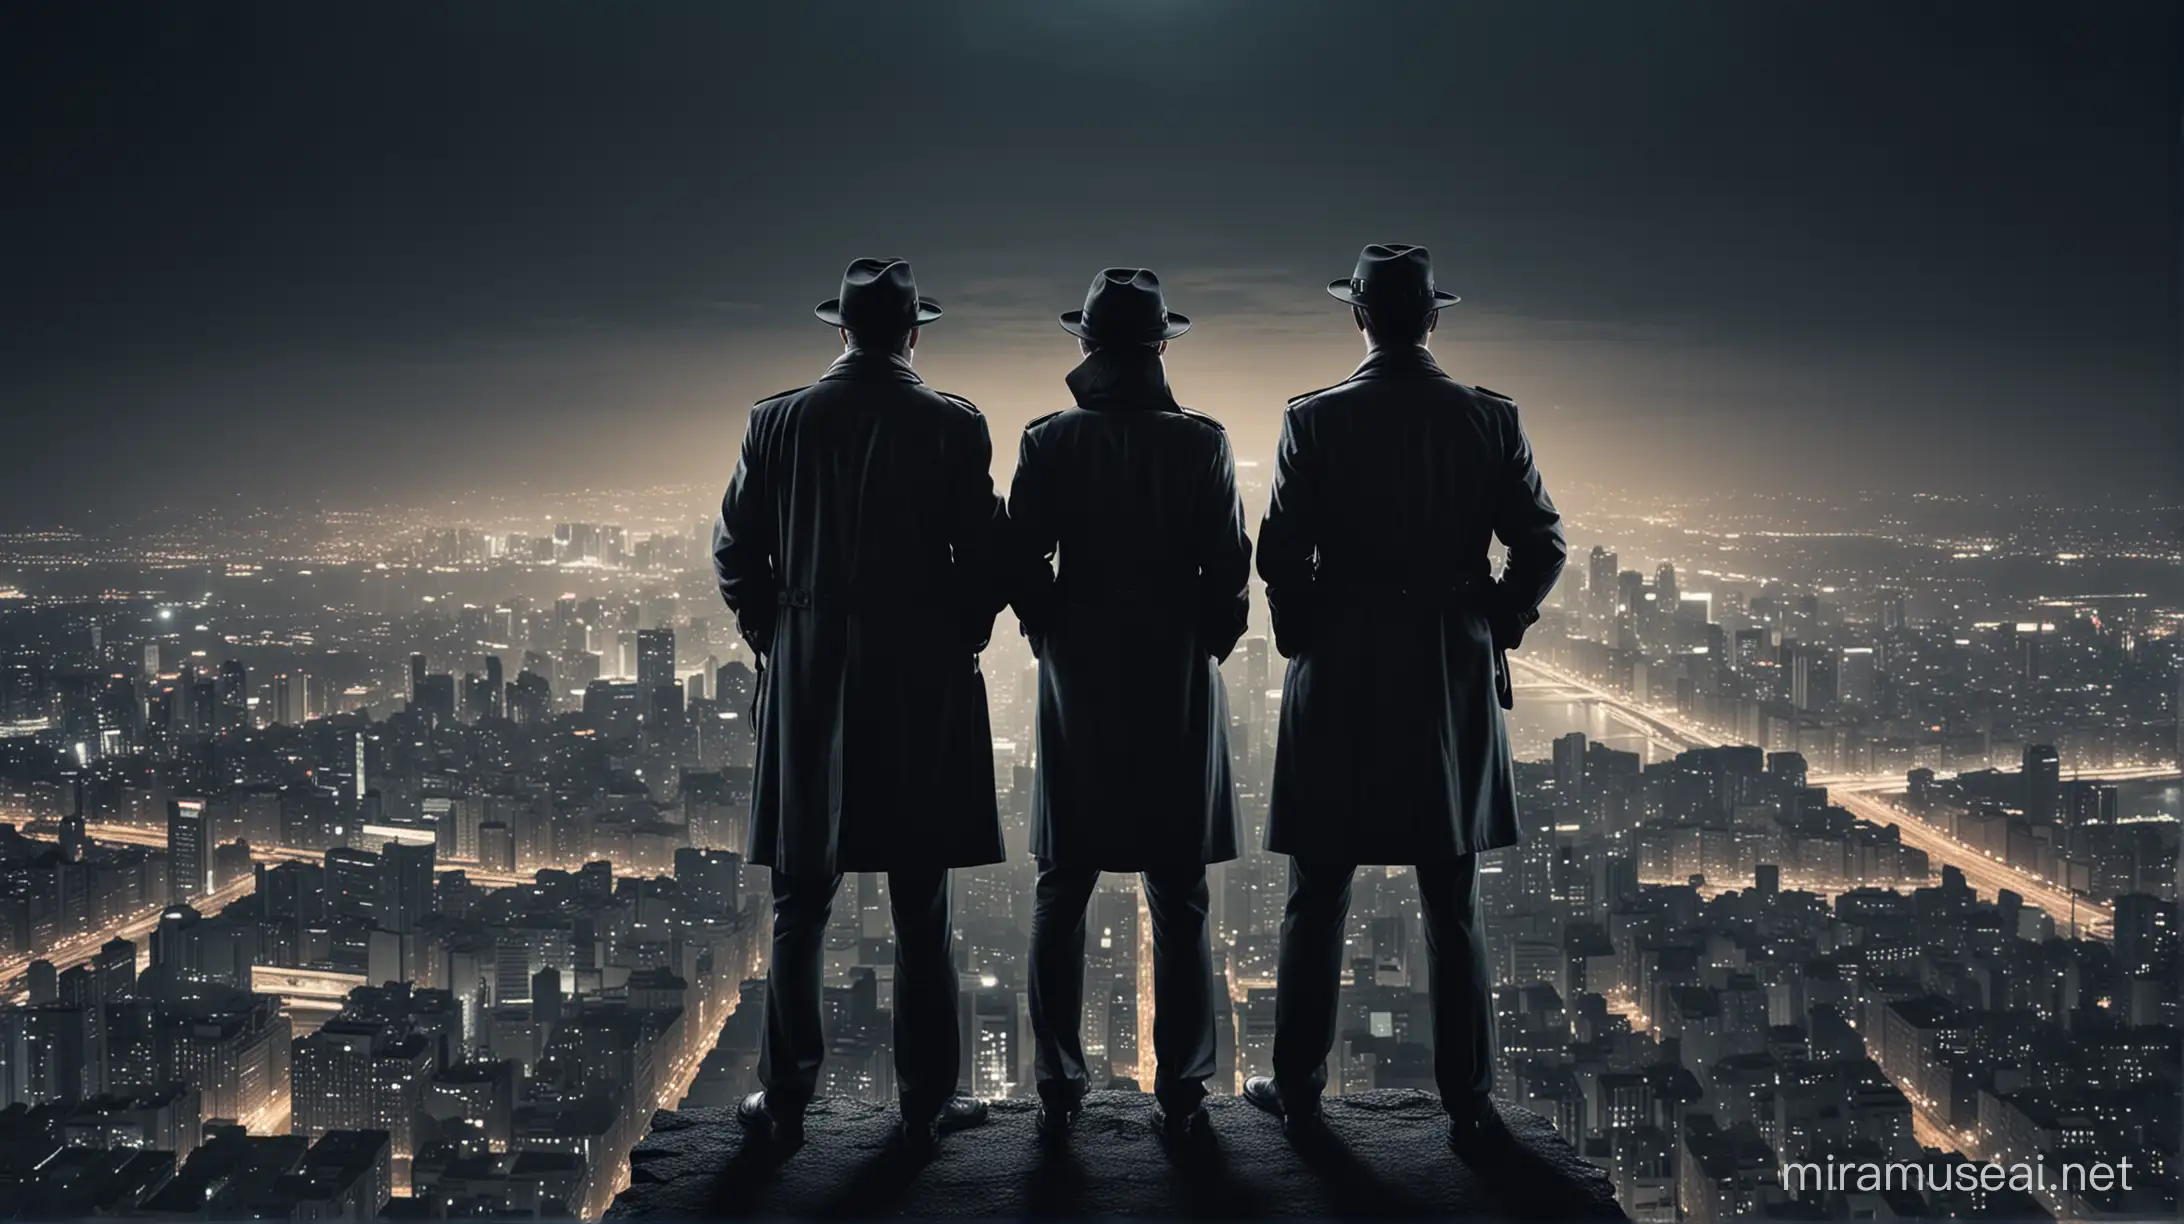 two detectives watching the city at night from the top. Make an image from there backside.